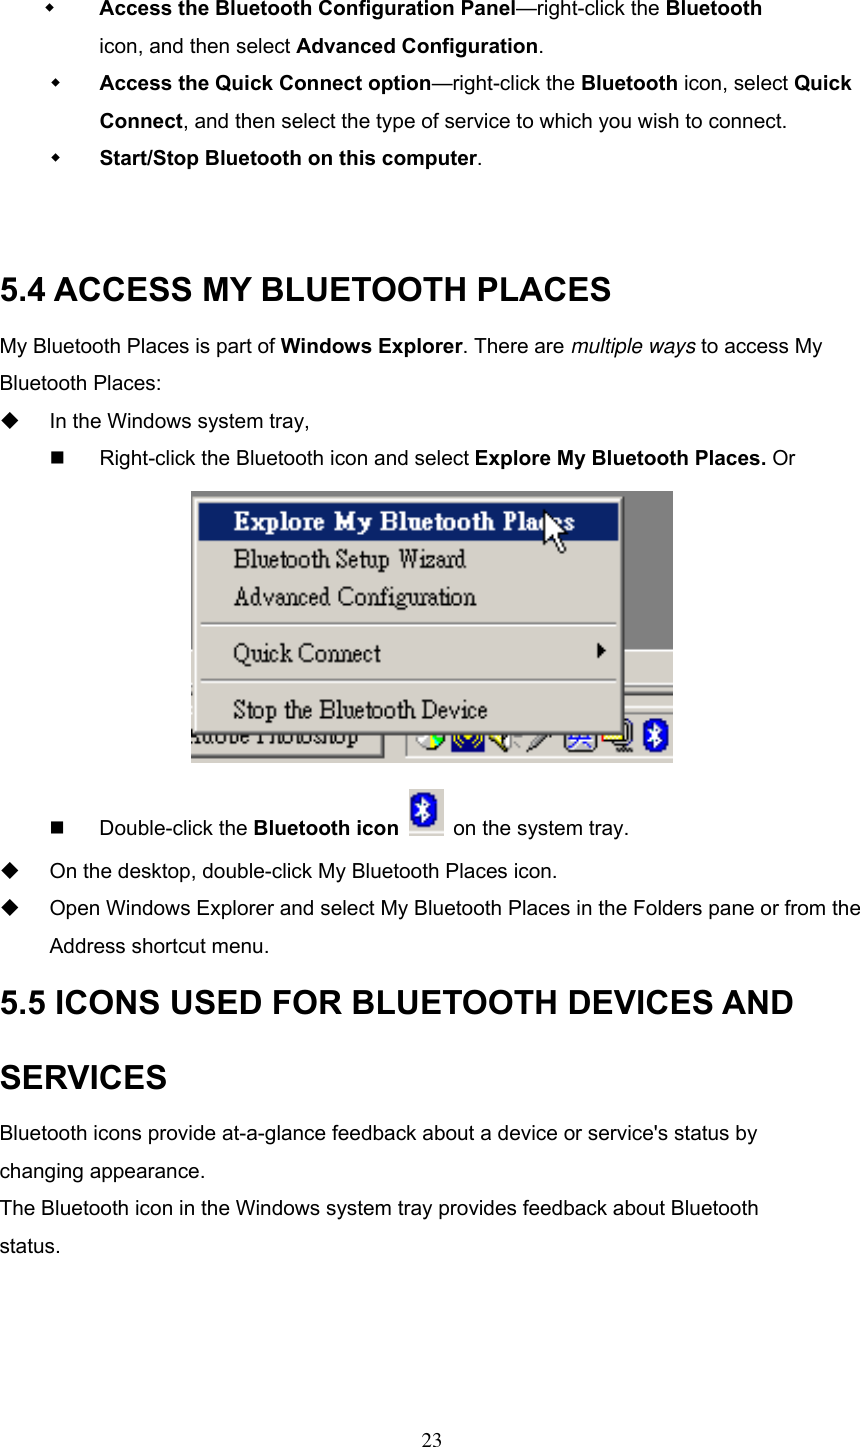    Access the Bluetooth Configuration Panel—right-click the Bluetooth  icon, and then select Advanced Configuration.   Access the Quick Connect option—right-click the Bluetooth icon, select Quick Connect, and then select the type of service to which you wish to connect.   Start/Stop Bluetooth on this computer.   5.4 ACCESS MY BLUETOOTH PLACES My Bluetooth Places is part of Windows Explorer. There are multiple ways to access My Bluetooth Places:     In the Windows system tray,     Right-click the Bluetooth icon and select Explore My Bluetooth Places. Or    Double-click the Bluetooth icon   on the system tray.   On the desktop, double-click My Bluetooth Places icon.     Open Windows Explorer and select My Bluetooth Places in the Folders pane or from the Address shortcut menu. 5.5 ICONS USED FOR BLUETOOTH DEVICES AND SERVICES Bluetooth icons provide at-a-glance feedback about a device or service&apos;s status by changing appearance. The Bluetooth icon in the Windows system tray provides feedback about Bluetooth status.     23 